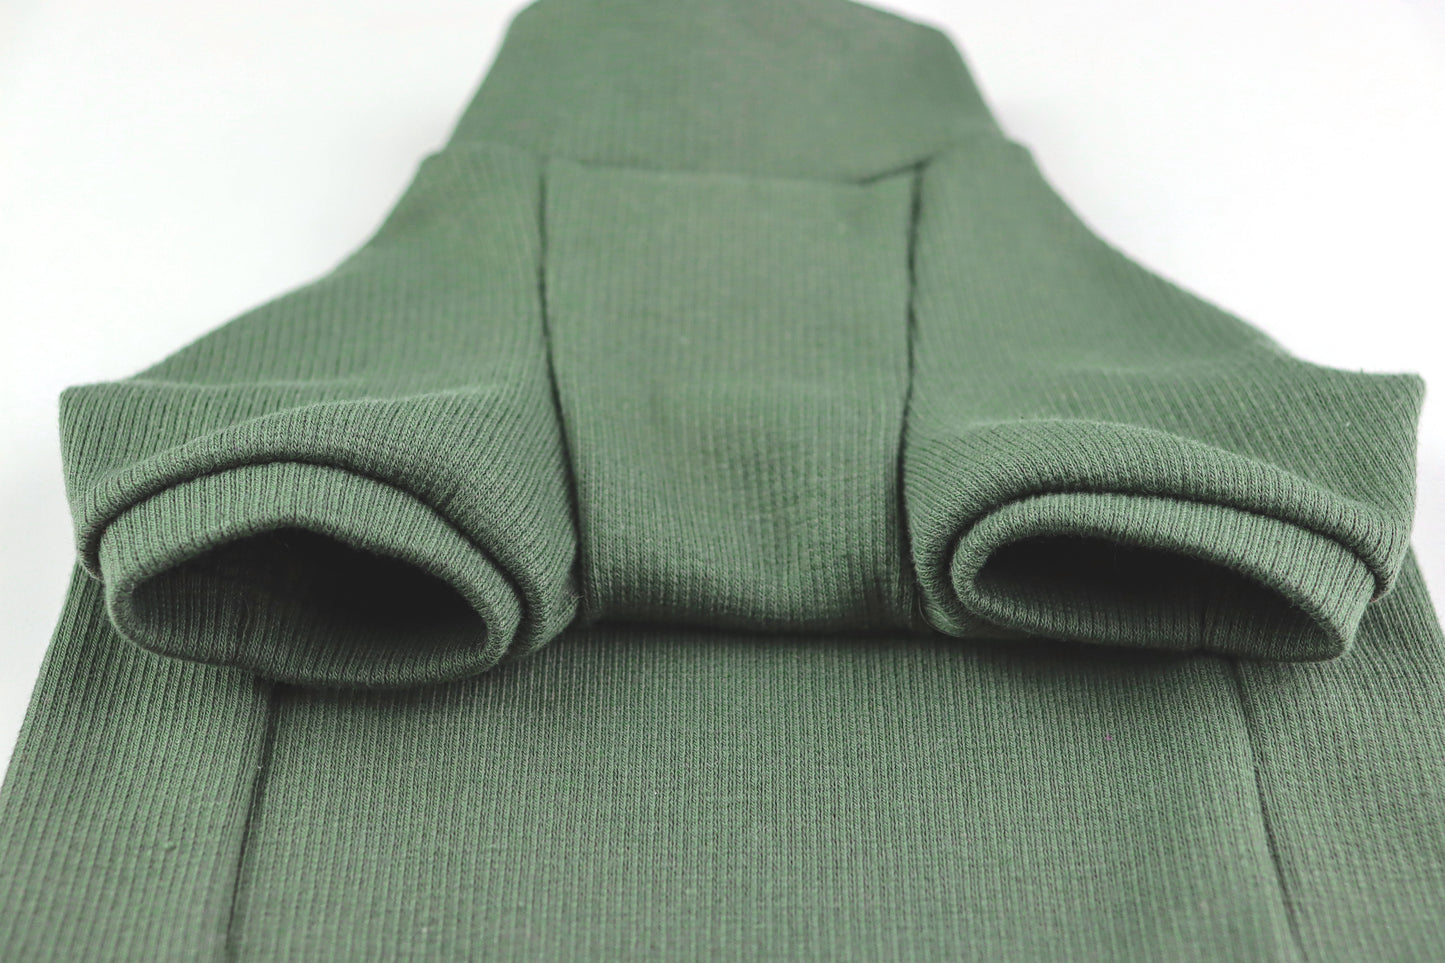 Hunter green cotton sweater for Cat. Shirt for Sphynx and all cats breeds